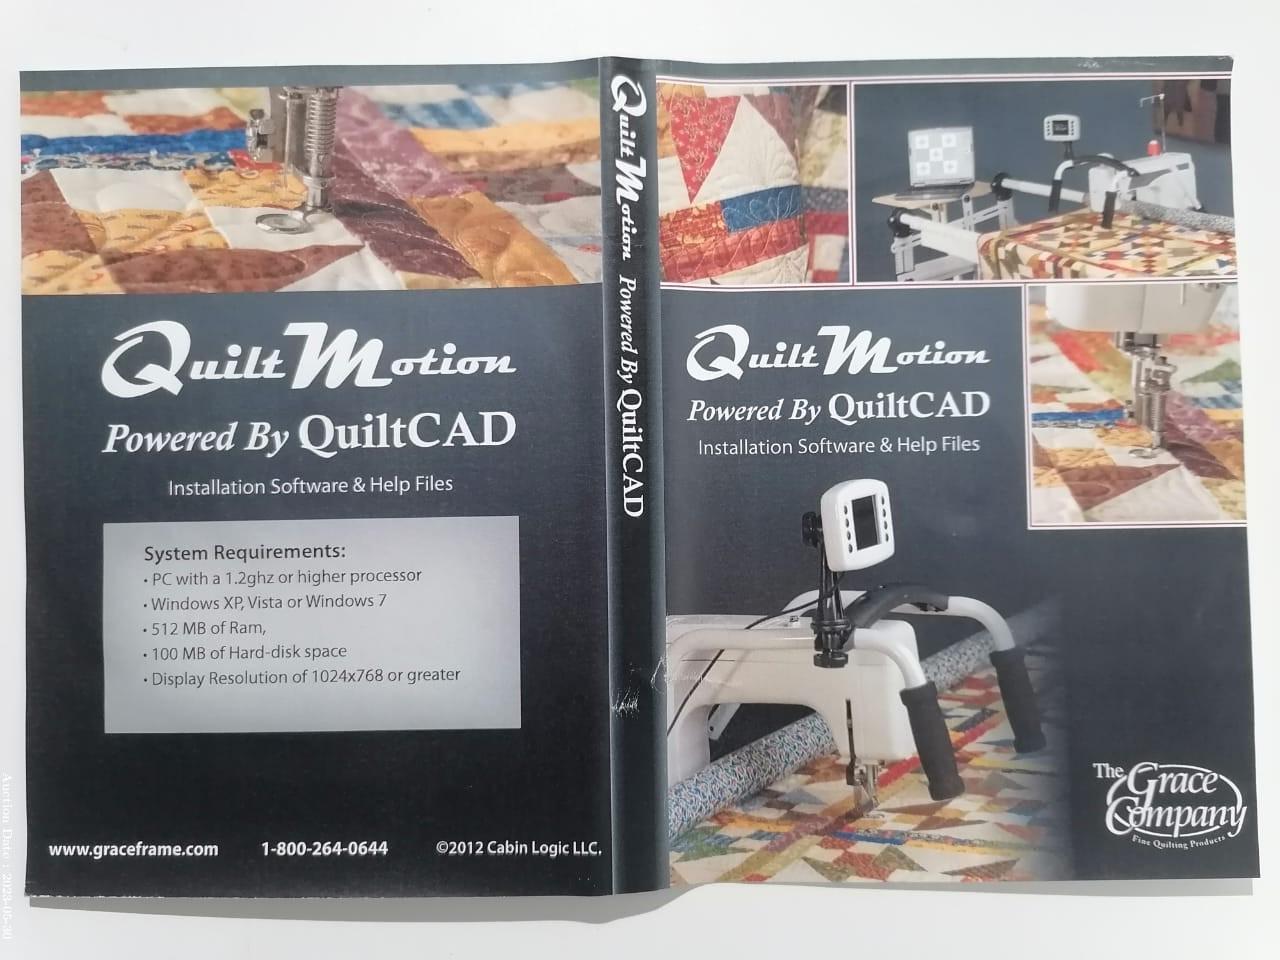 4004 - Decorative Quilt Motion - Powered By Quilt CAD Quilting Machine